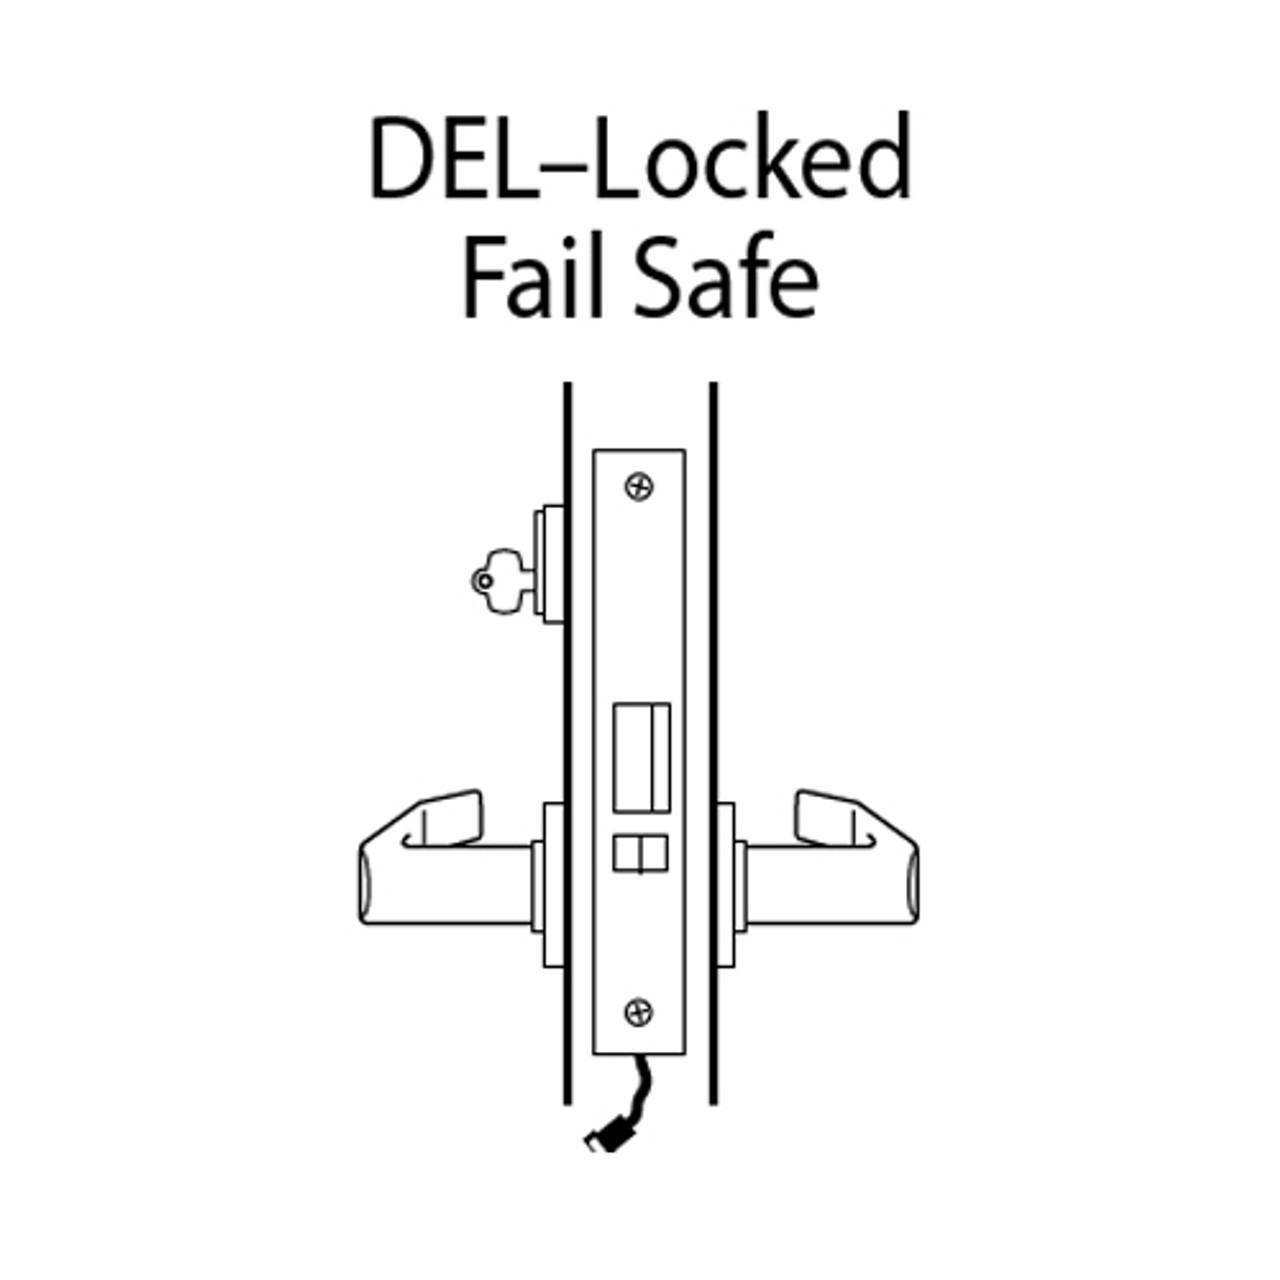 45HW7DEL16J606RQE12V Best 40HW series Single Key Latch Fail Safe Electromechanical Mortise Lever Lock with Curved w/ No Return Style in Satin Brass